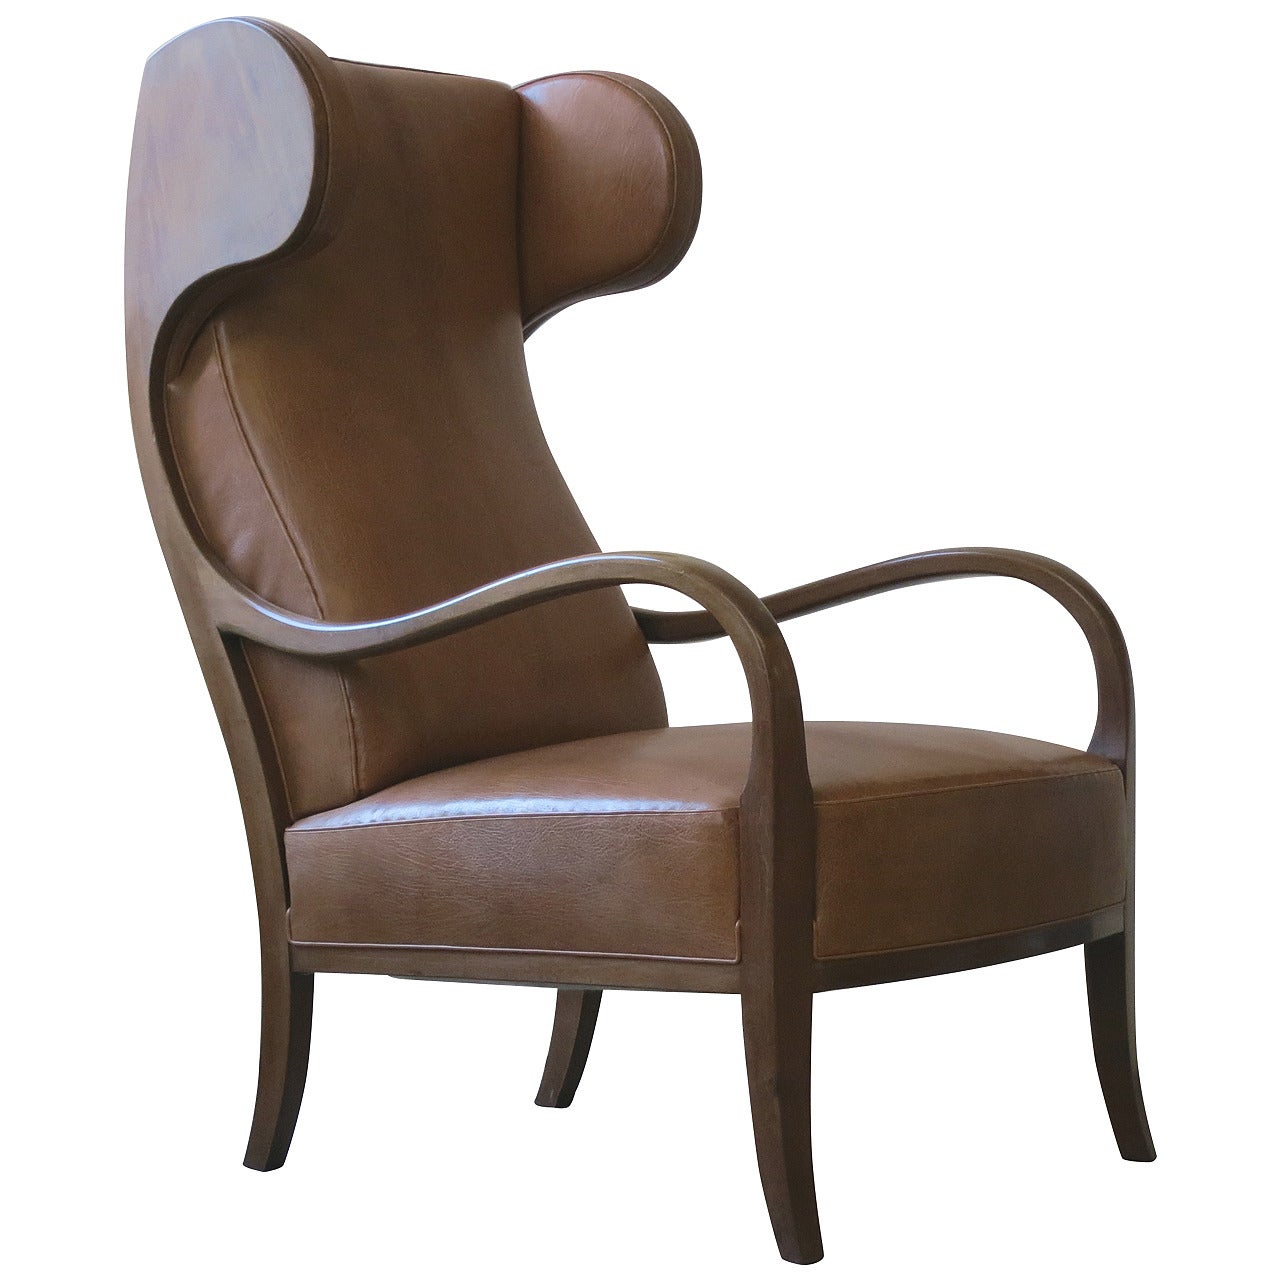 Unusual 1940s Wingback Chair by Frits Henningsen